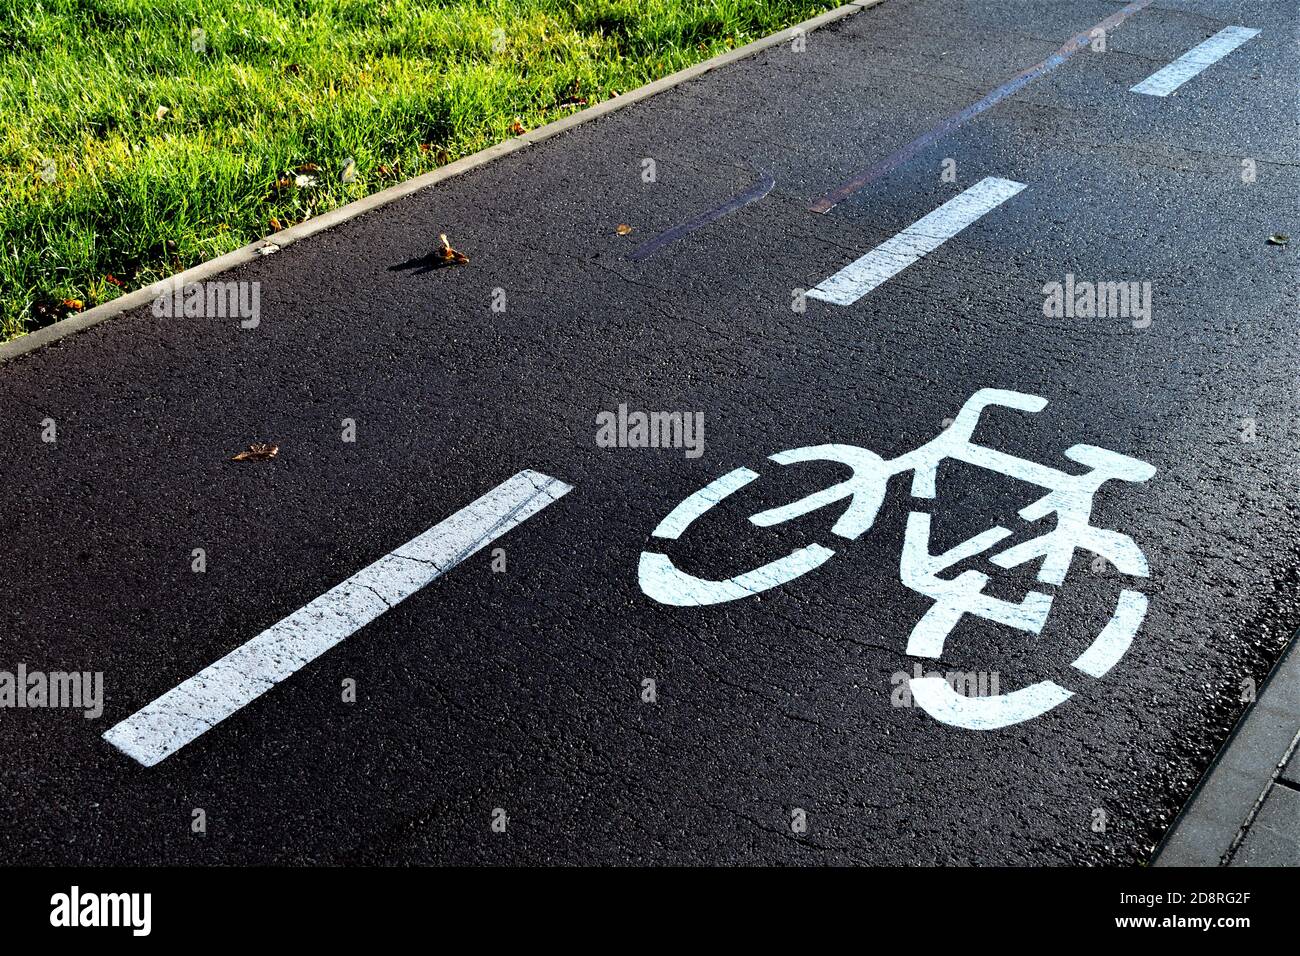 Sustainable transport. Bicycle traffic signal, road bike. Sustainability and alternative transportation. Environmental Project Management Stock Photo